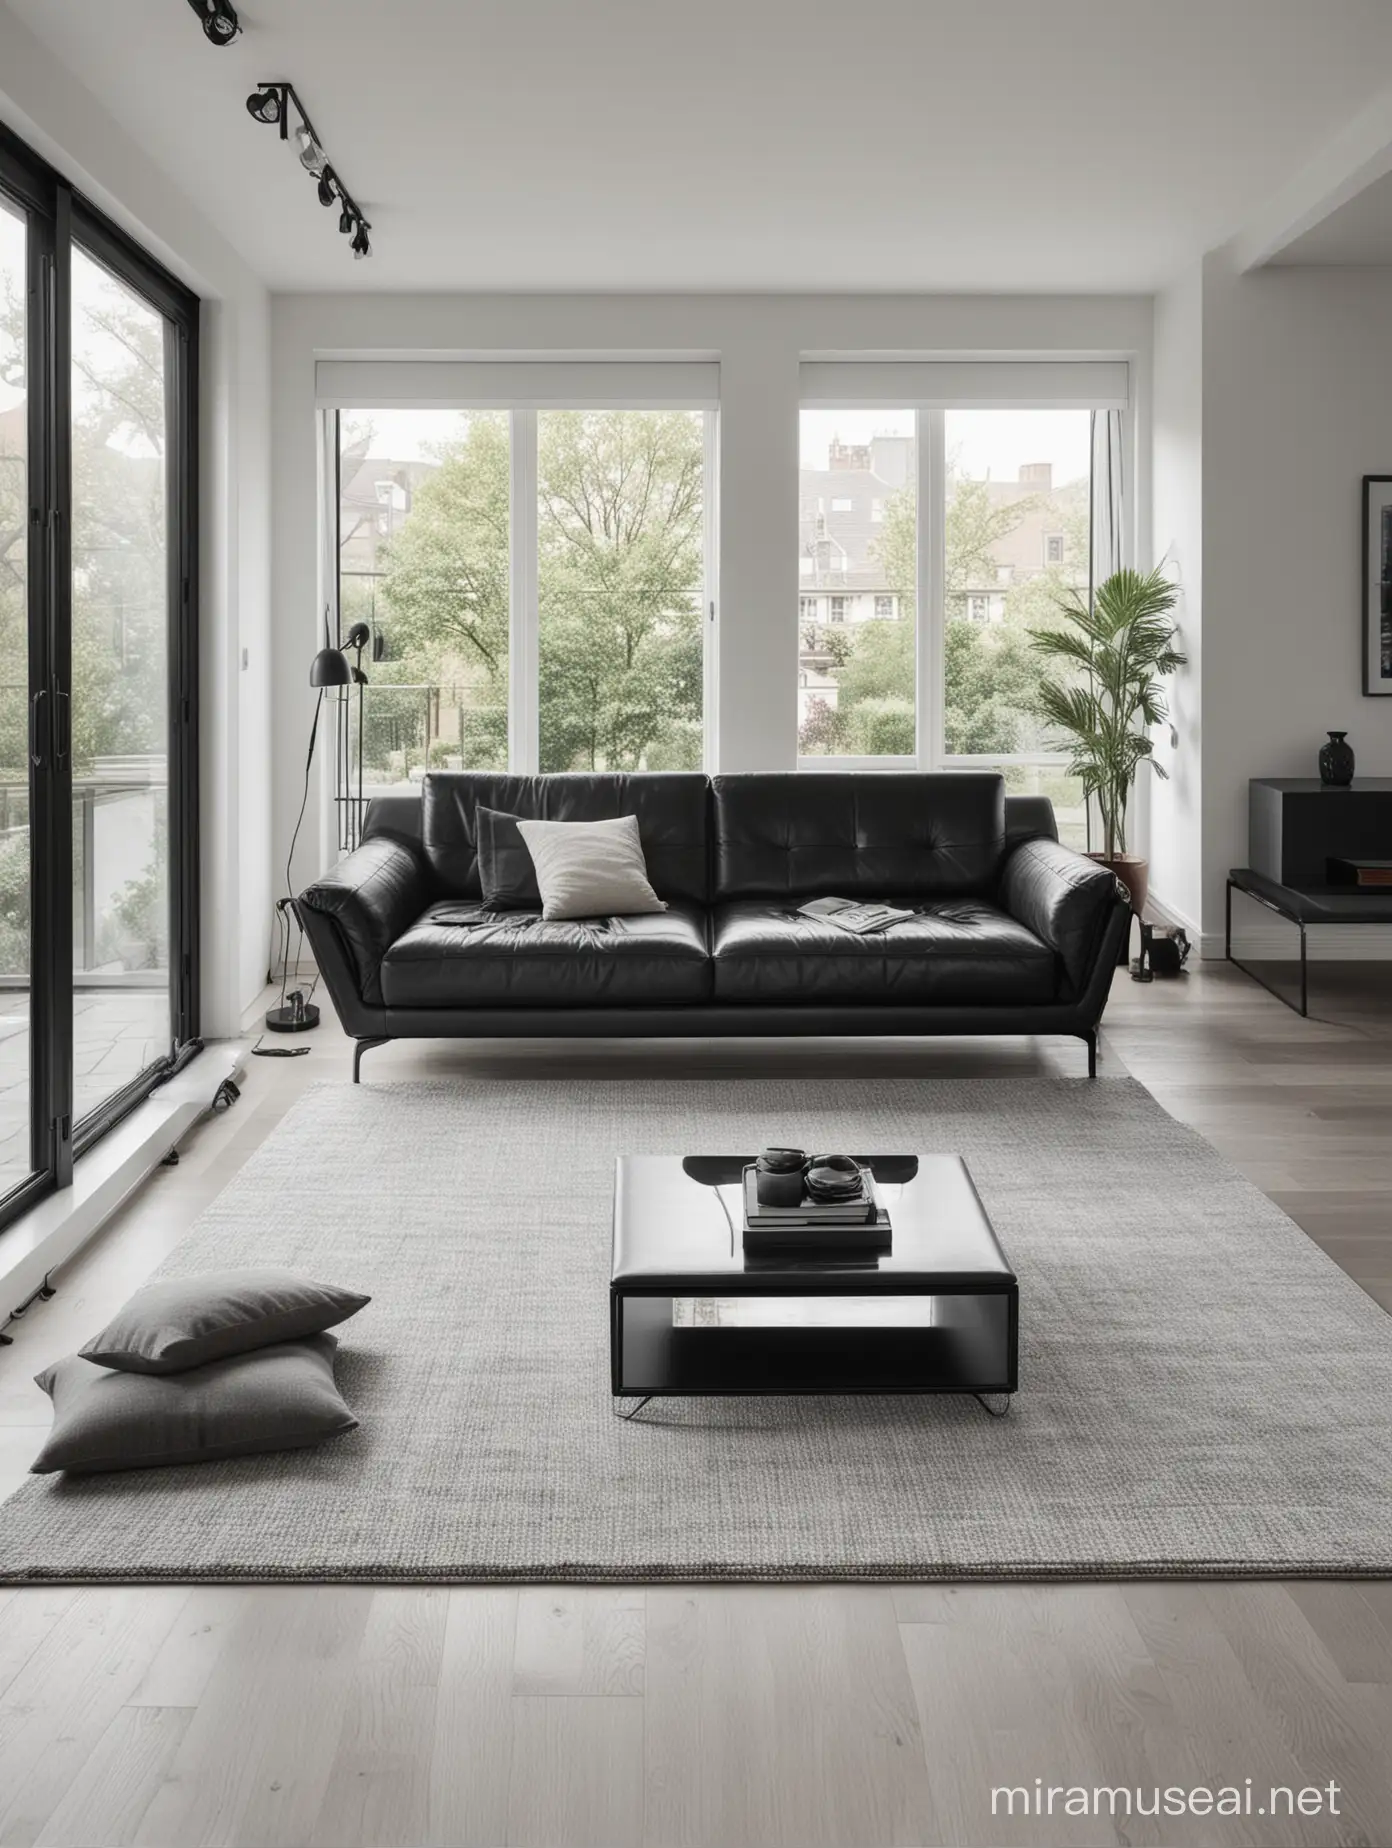 Minimalist Living Room with Black Leather Sofa and Bright Natural Light